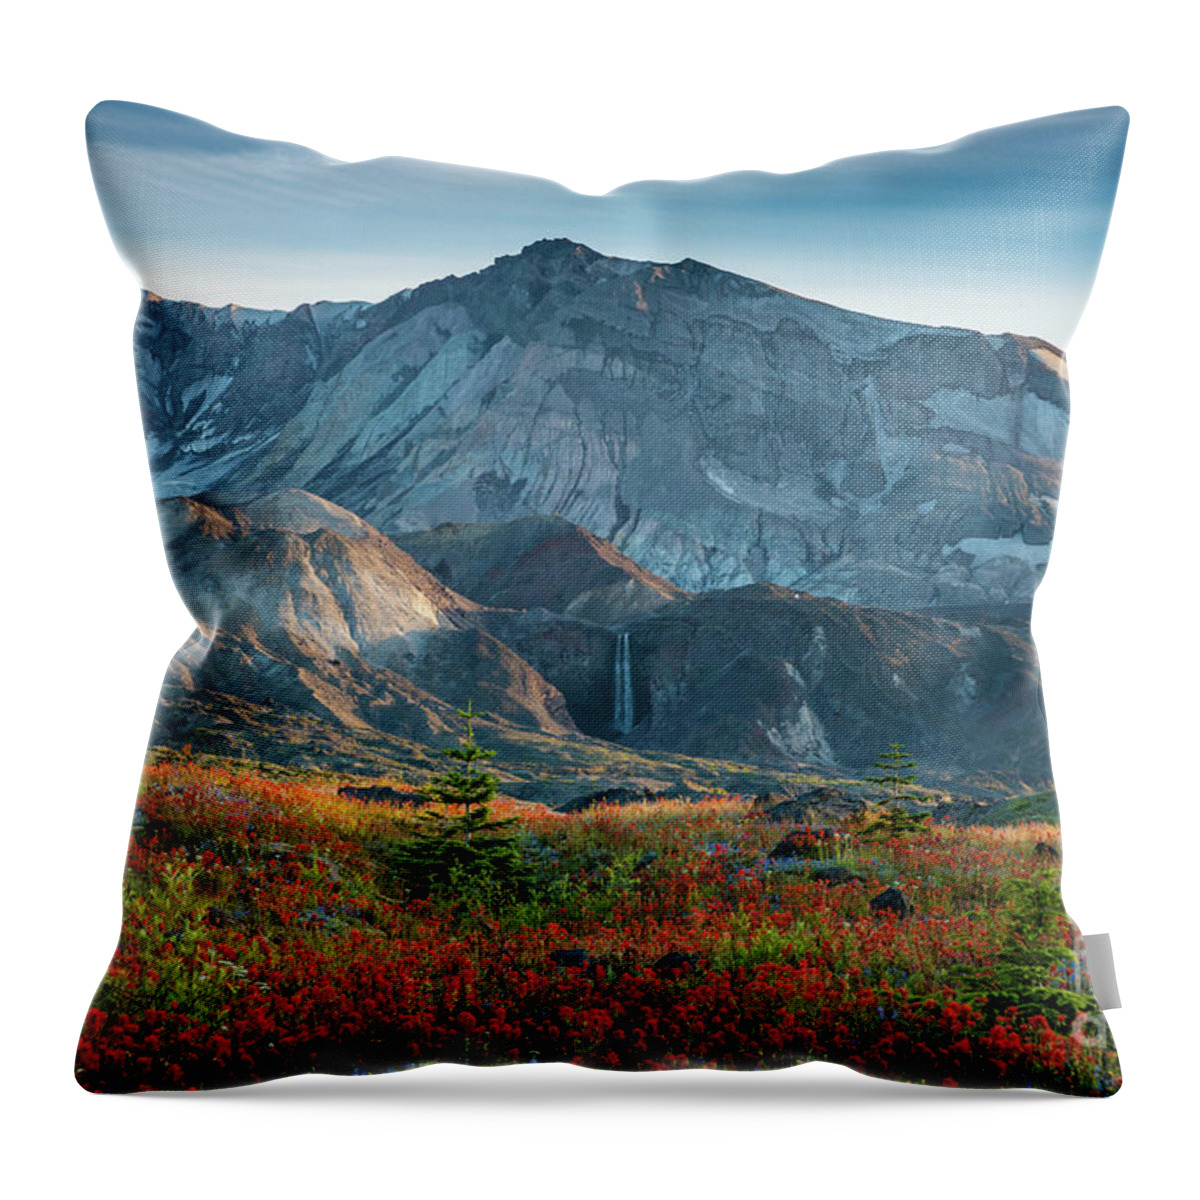 Mount St Helens Throw Pillow featuring the photograph Loowit Falls Mount St Helens Wildflowers by Mike Reid